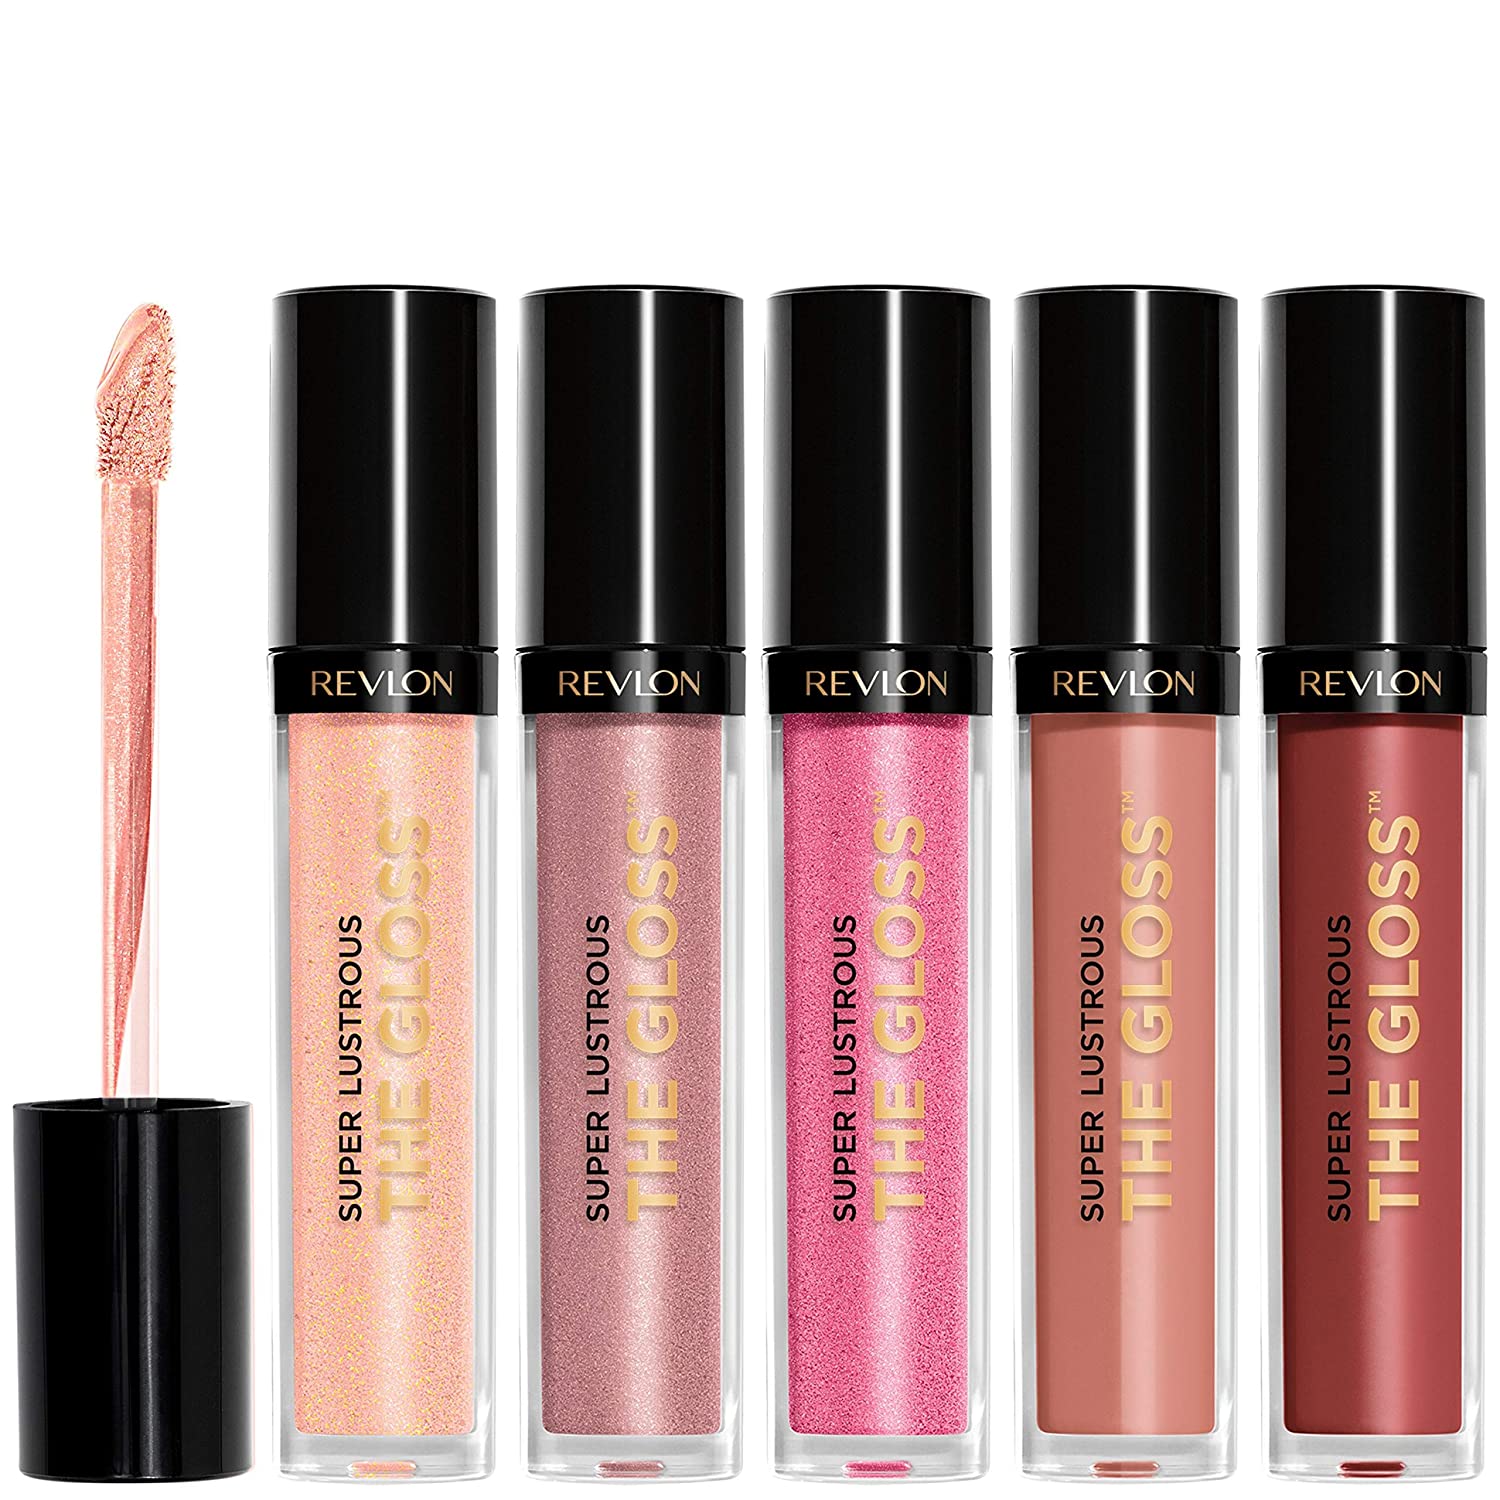 5-Piece Revlon Super Lustrous Lip Gloss Gift Set (Cream & Pearl Finish) $9.10 ($1.82 each) w/ S&S + Free Shipping w/ Prime or Orders $25